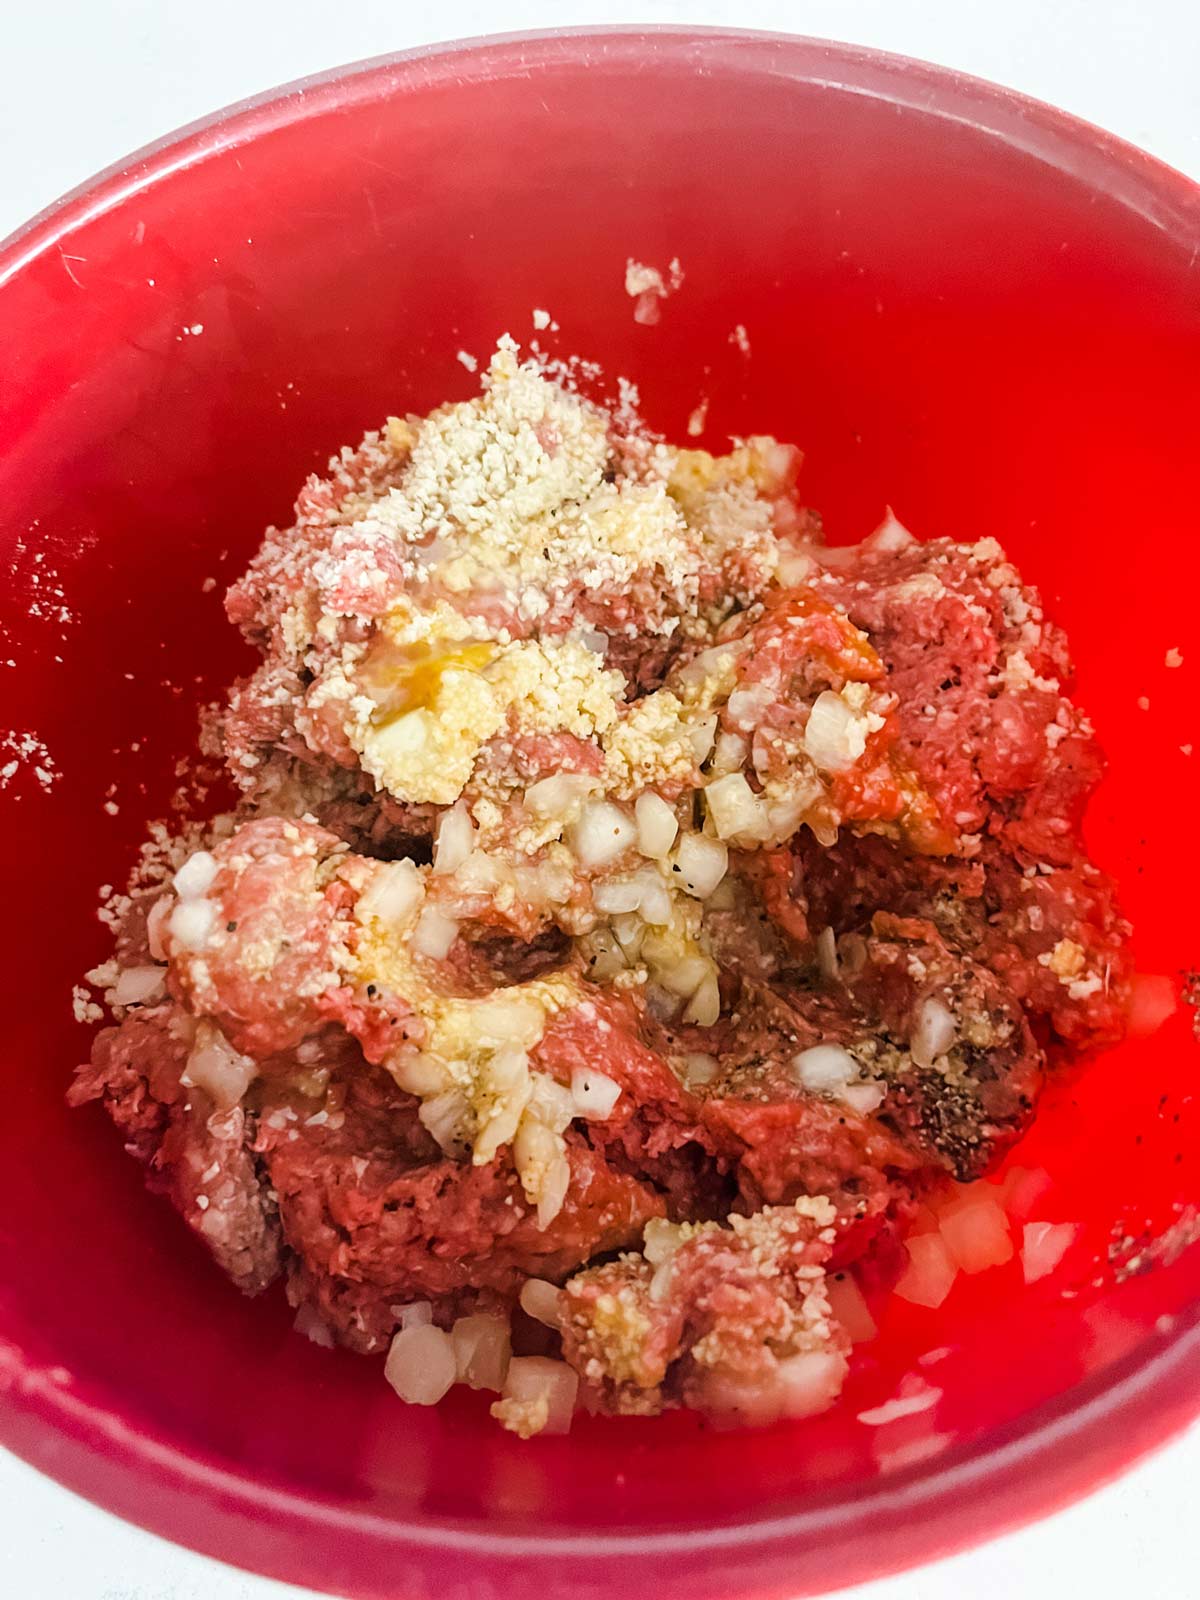 Ground beef being mixed with diced onion, egg, breadcrumbs and seasonings.